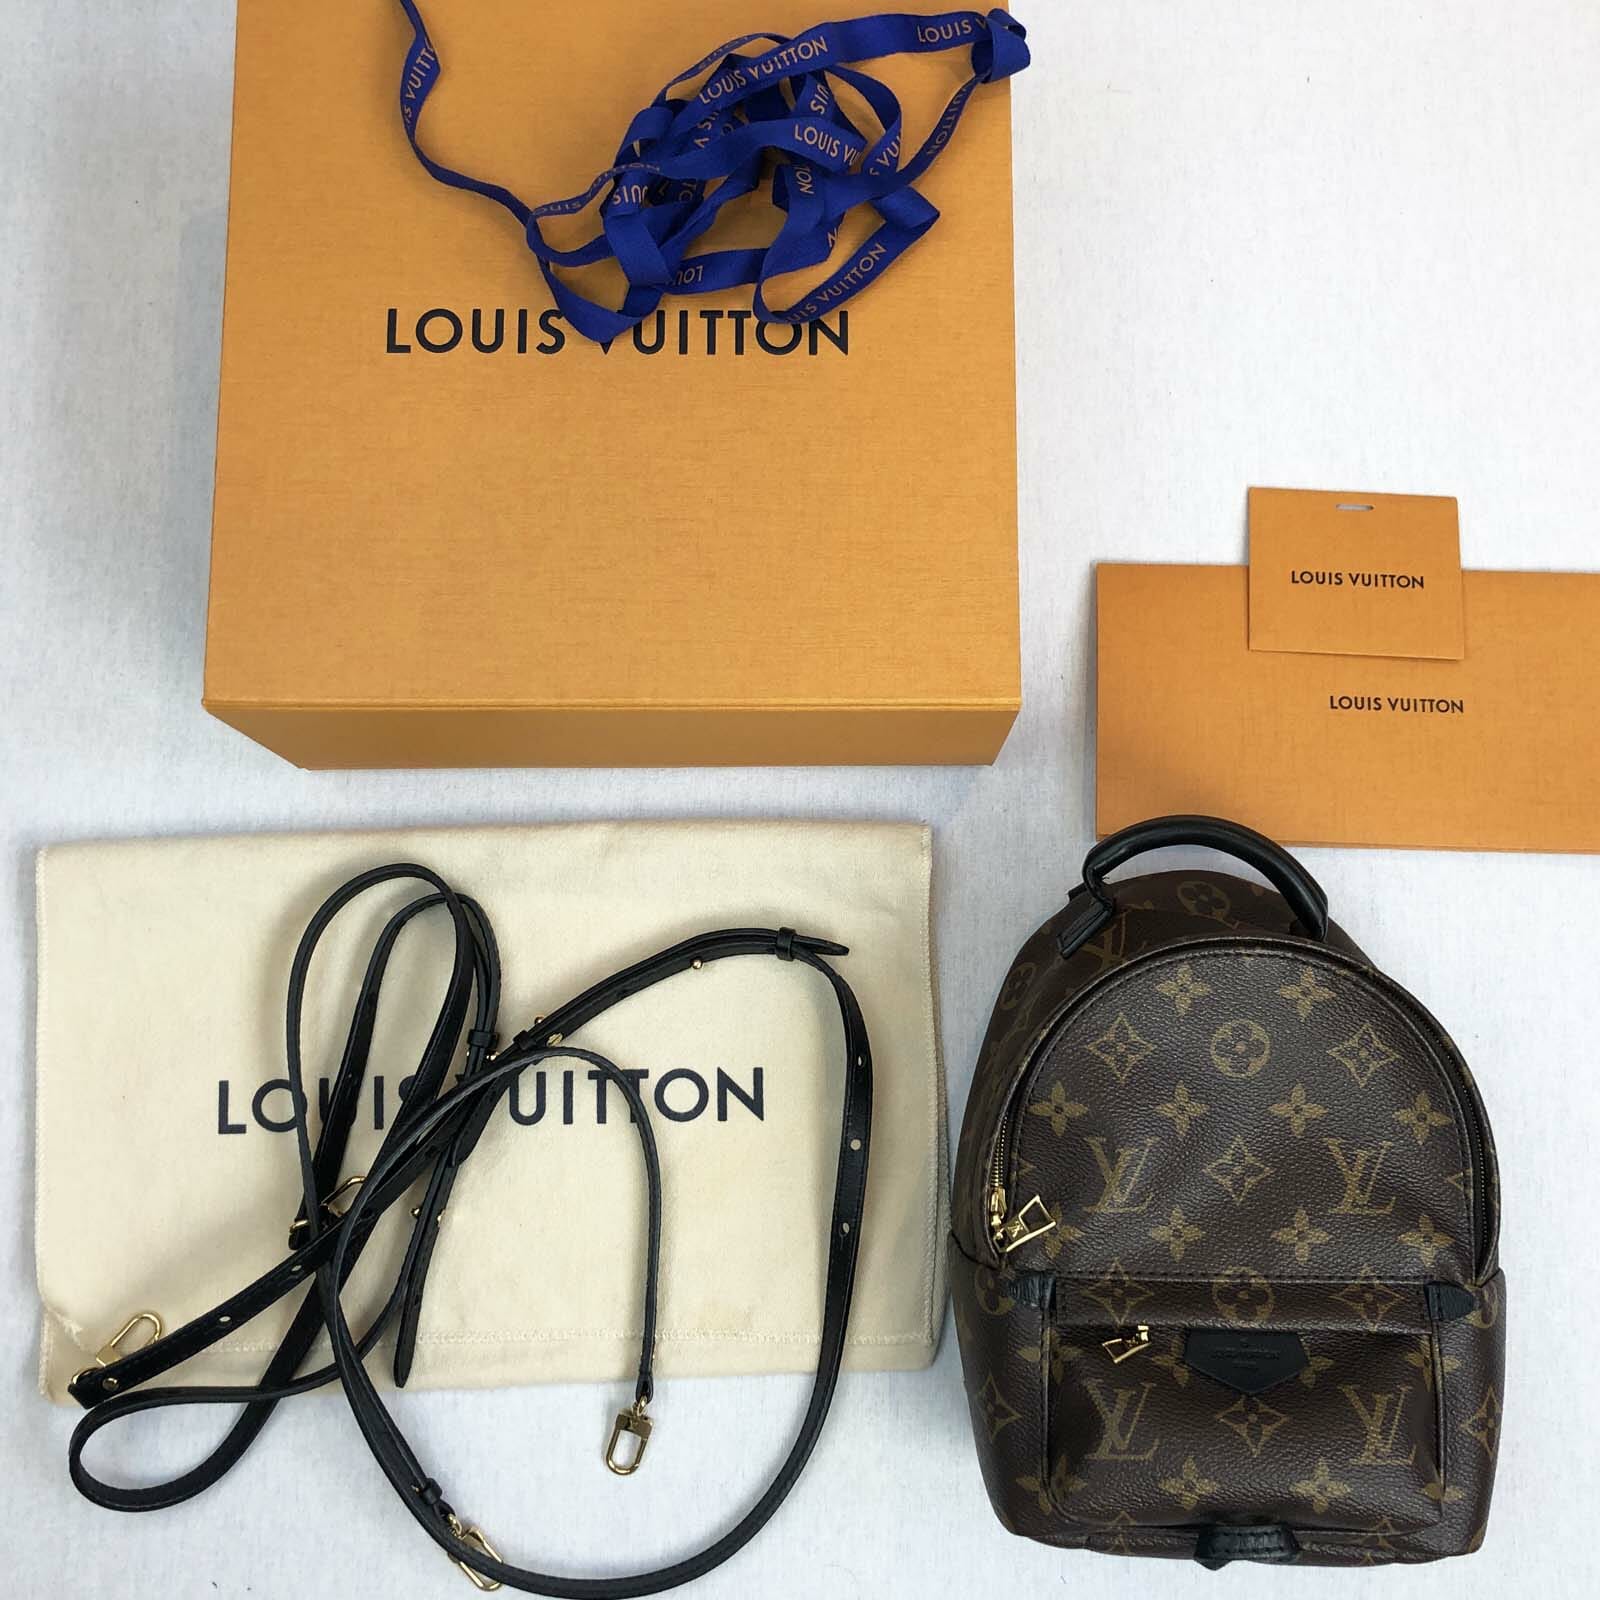 Bag of the Week: Louis Vuitton Palm Spring backpack